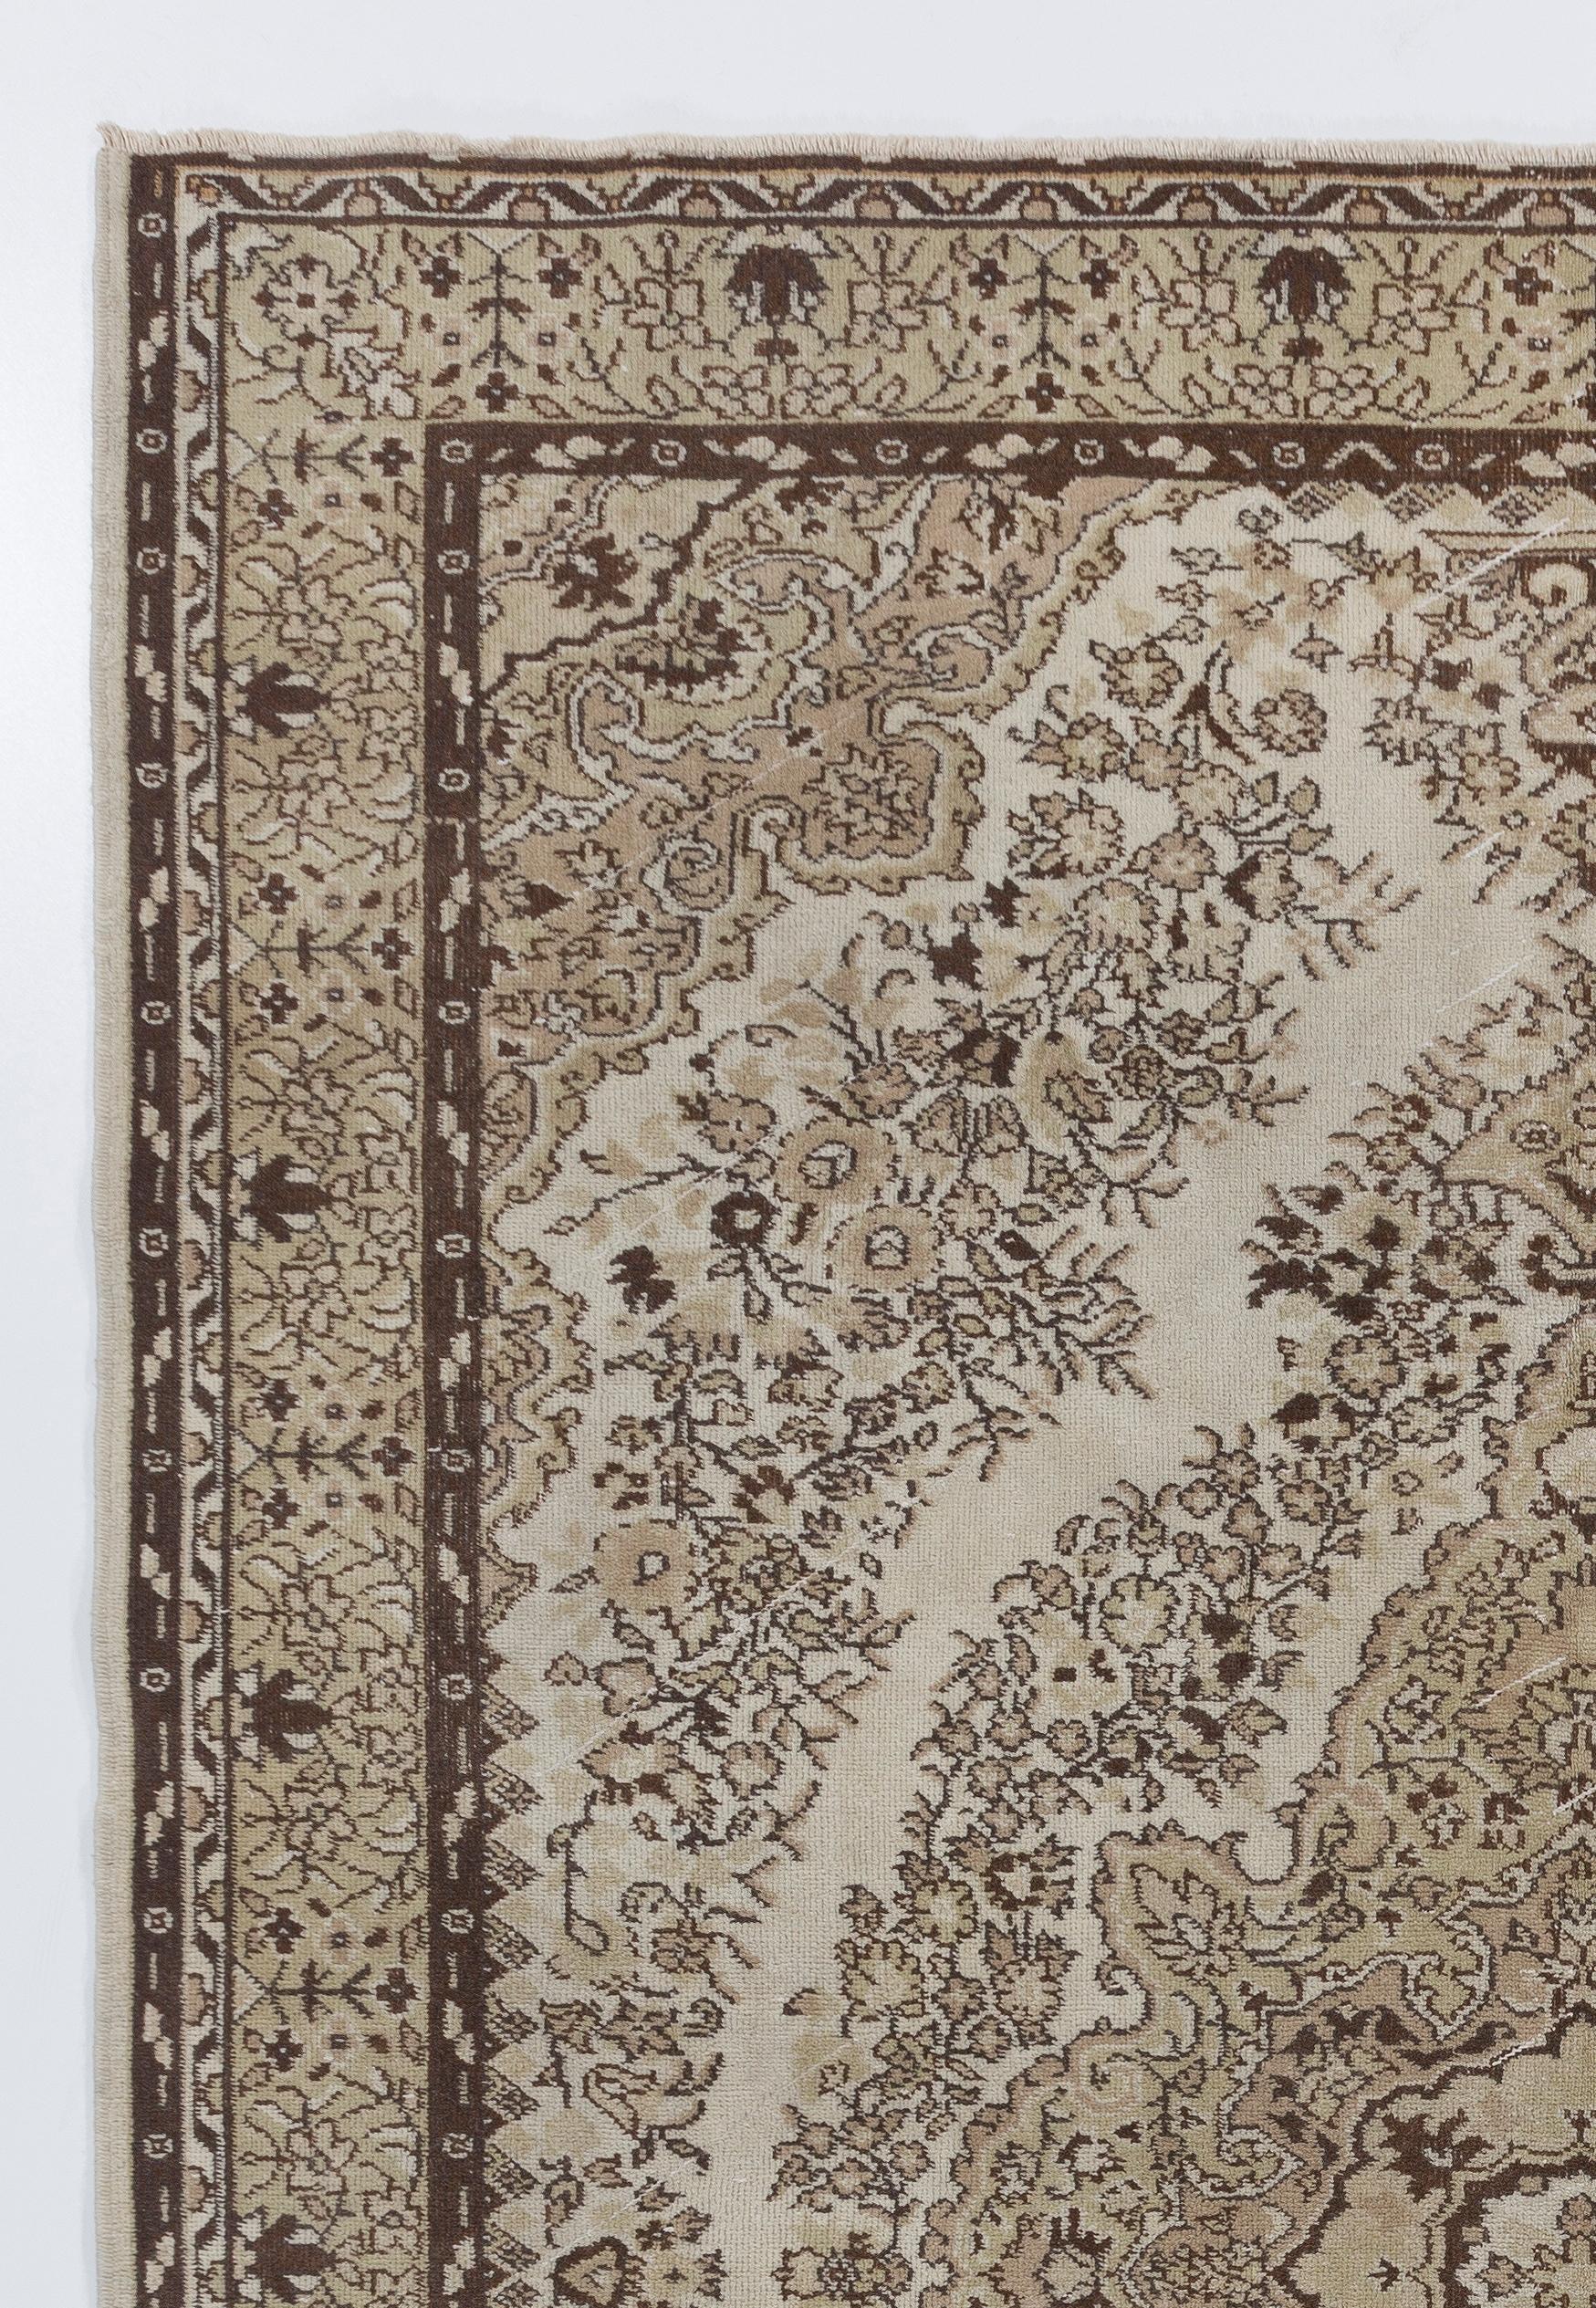 A vintage hand-knotted Turkish area rug with an elaborately decorated design of a central medallion against a two-layered field filled with strolling leafy vines with palmette heads in fine gradations of neutral tones of ivory, beige, light taupe